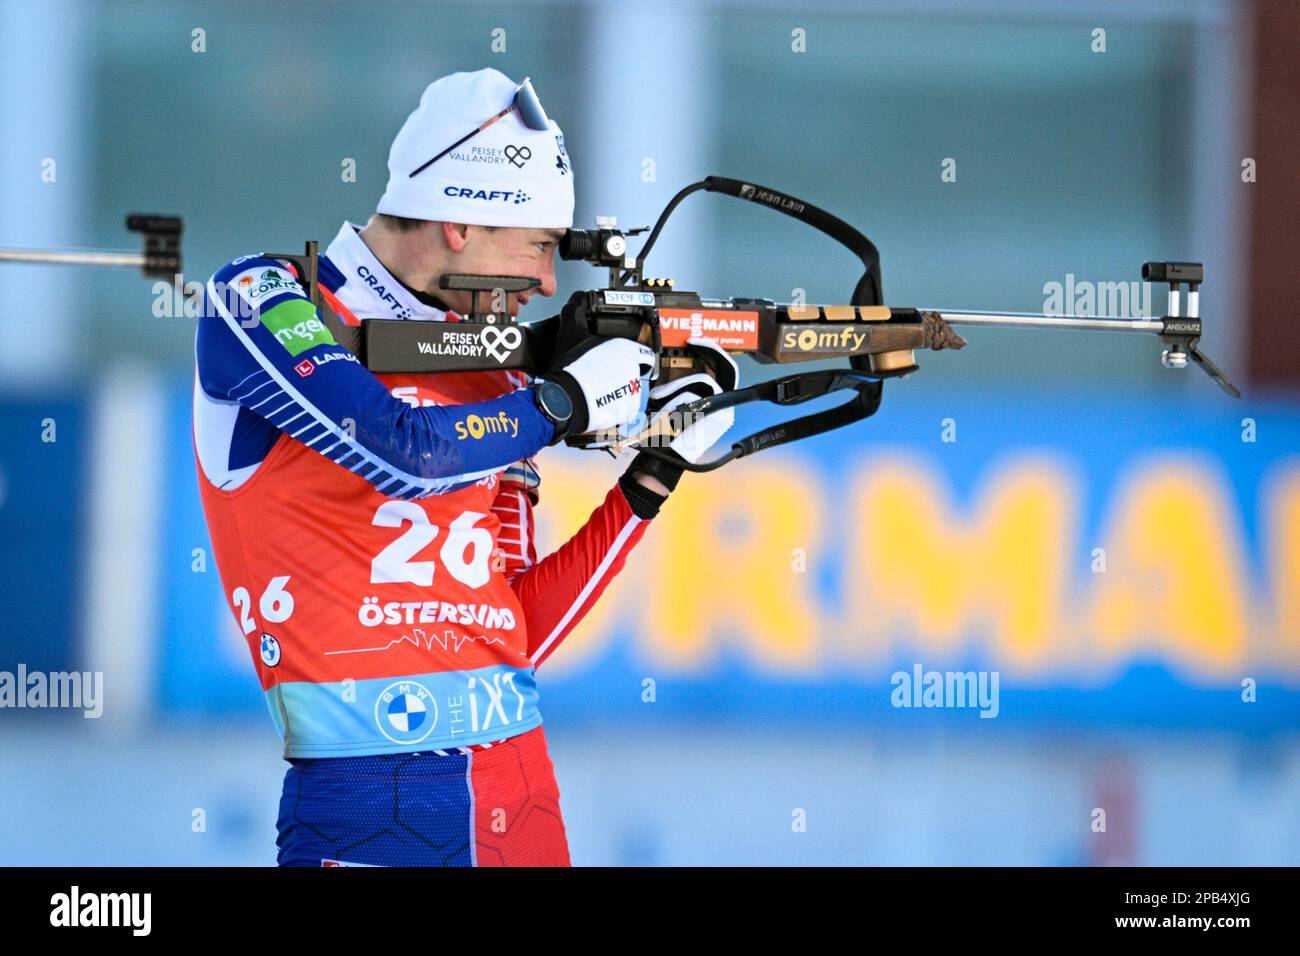 Frances Eric Perrot in action during the Mens IBU Biathlon World Cup mass start event in Ostersund, Sweden, on March 12, 2023.Photo Anders Wiklund / TT / code 10040 Credit TT News